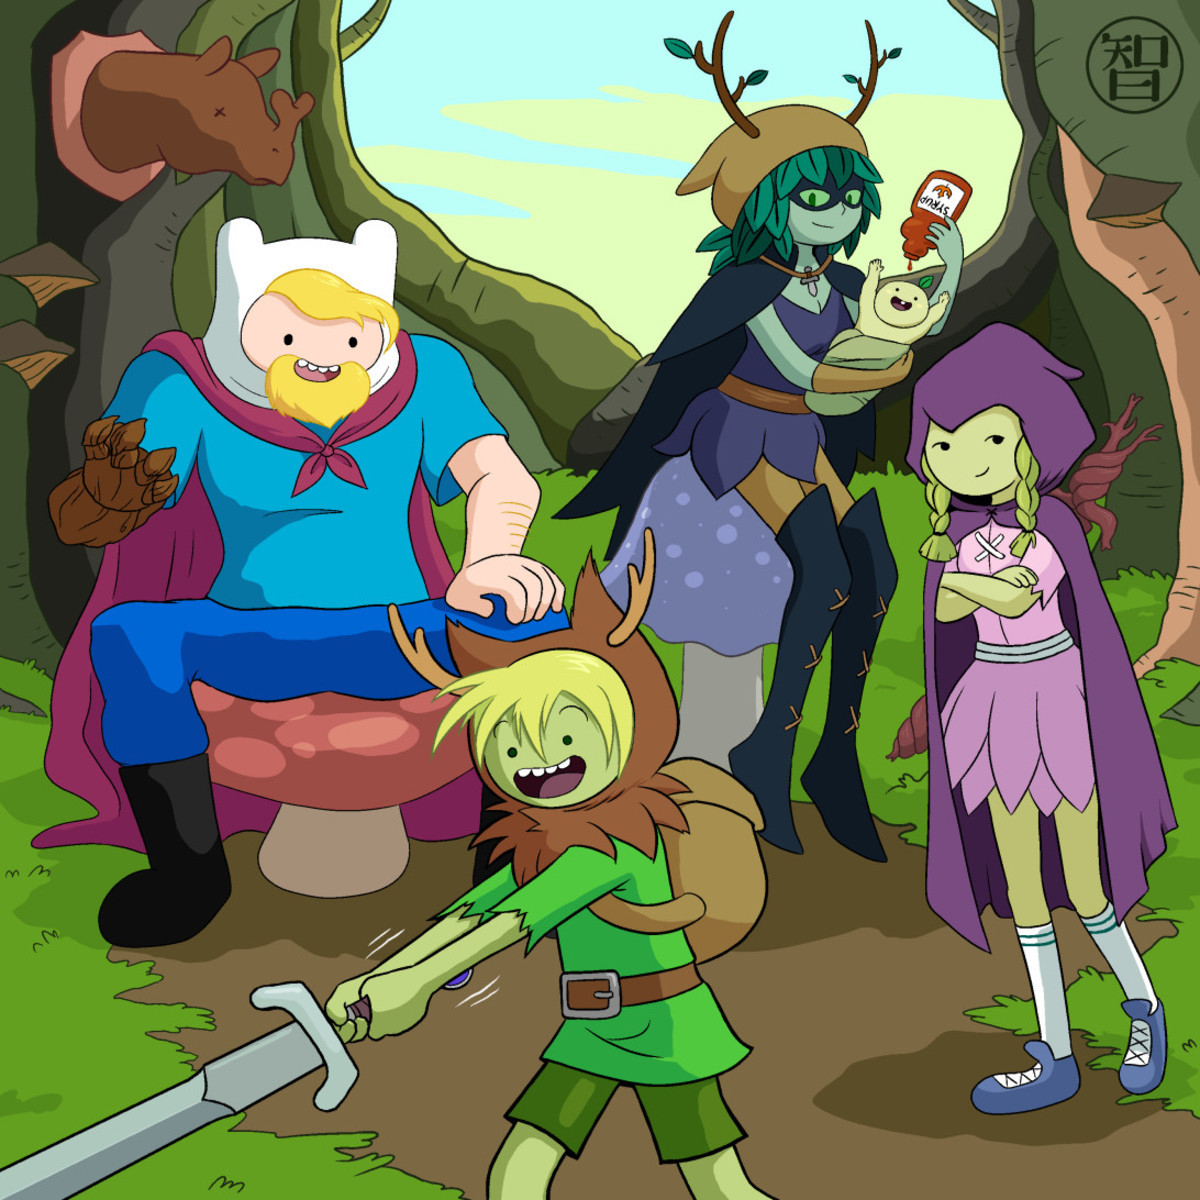 Can't recall how I first found out about Adventure Time. 